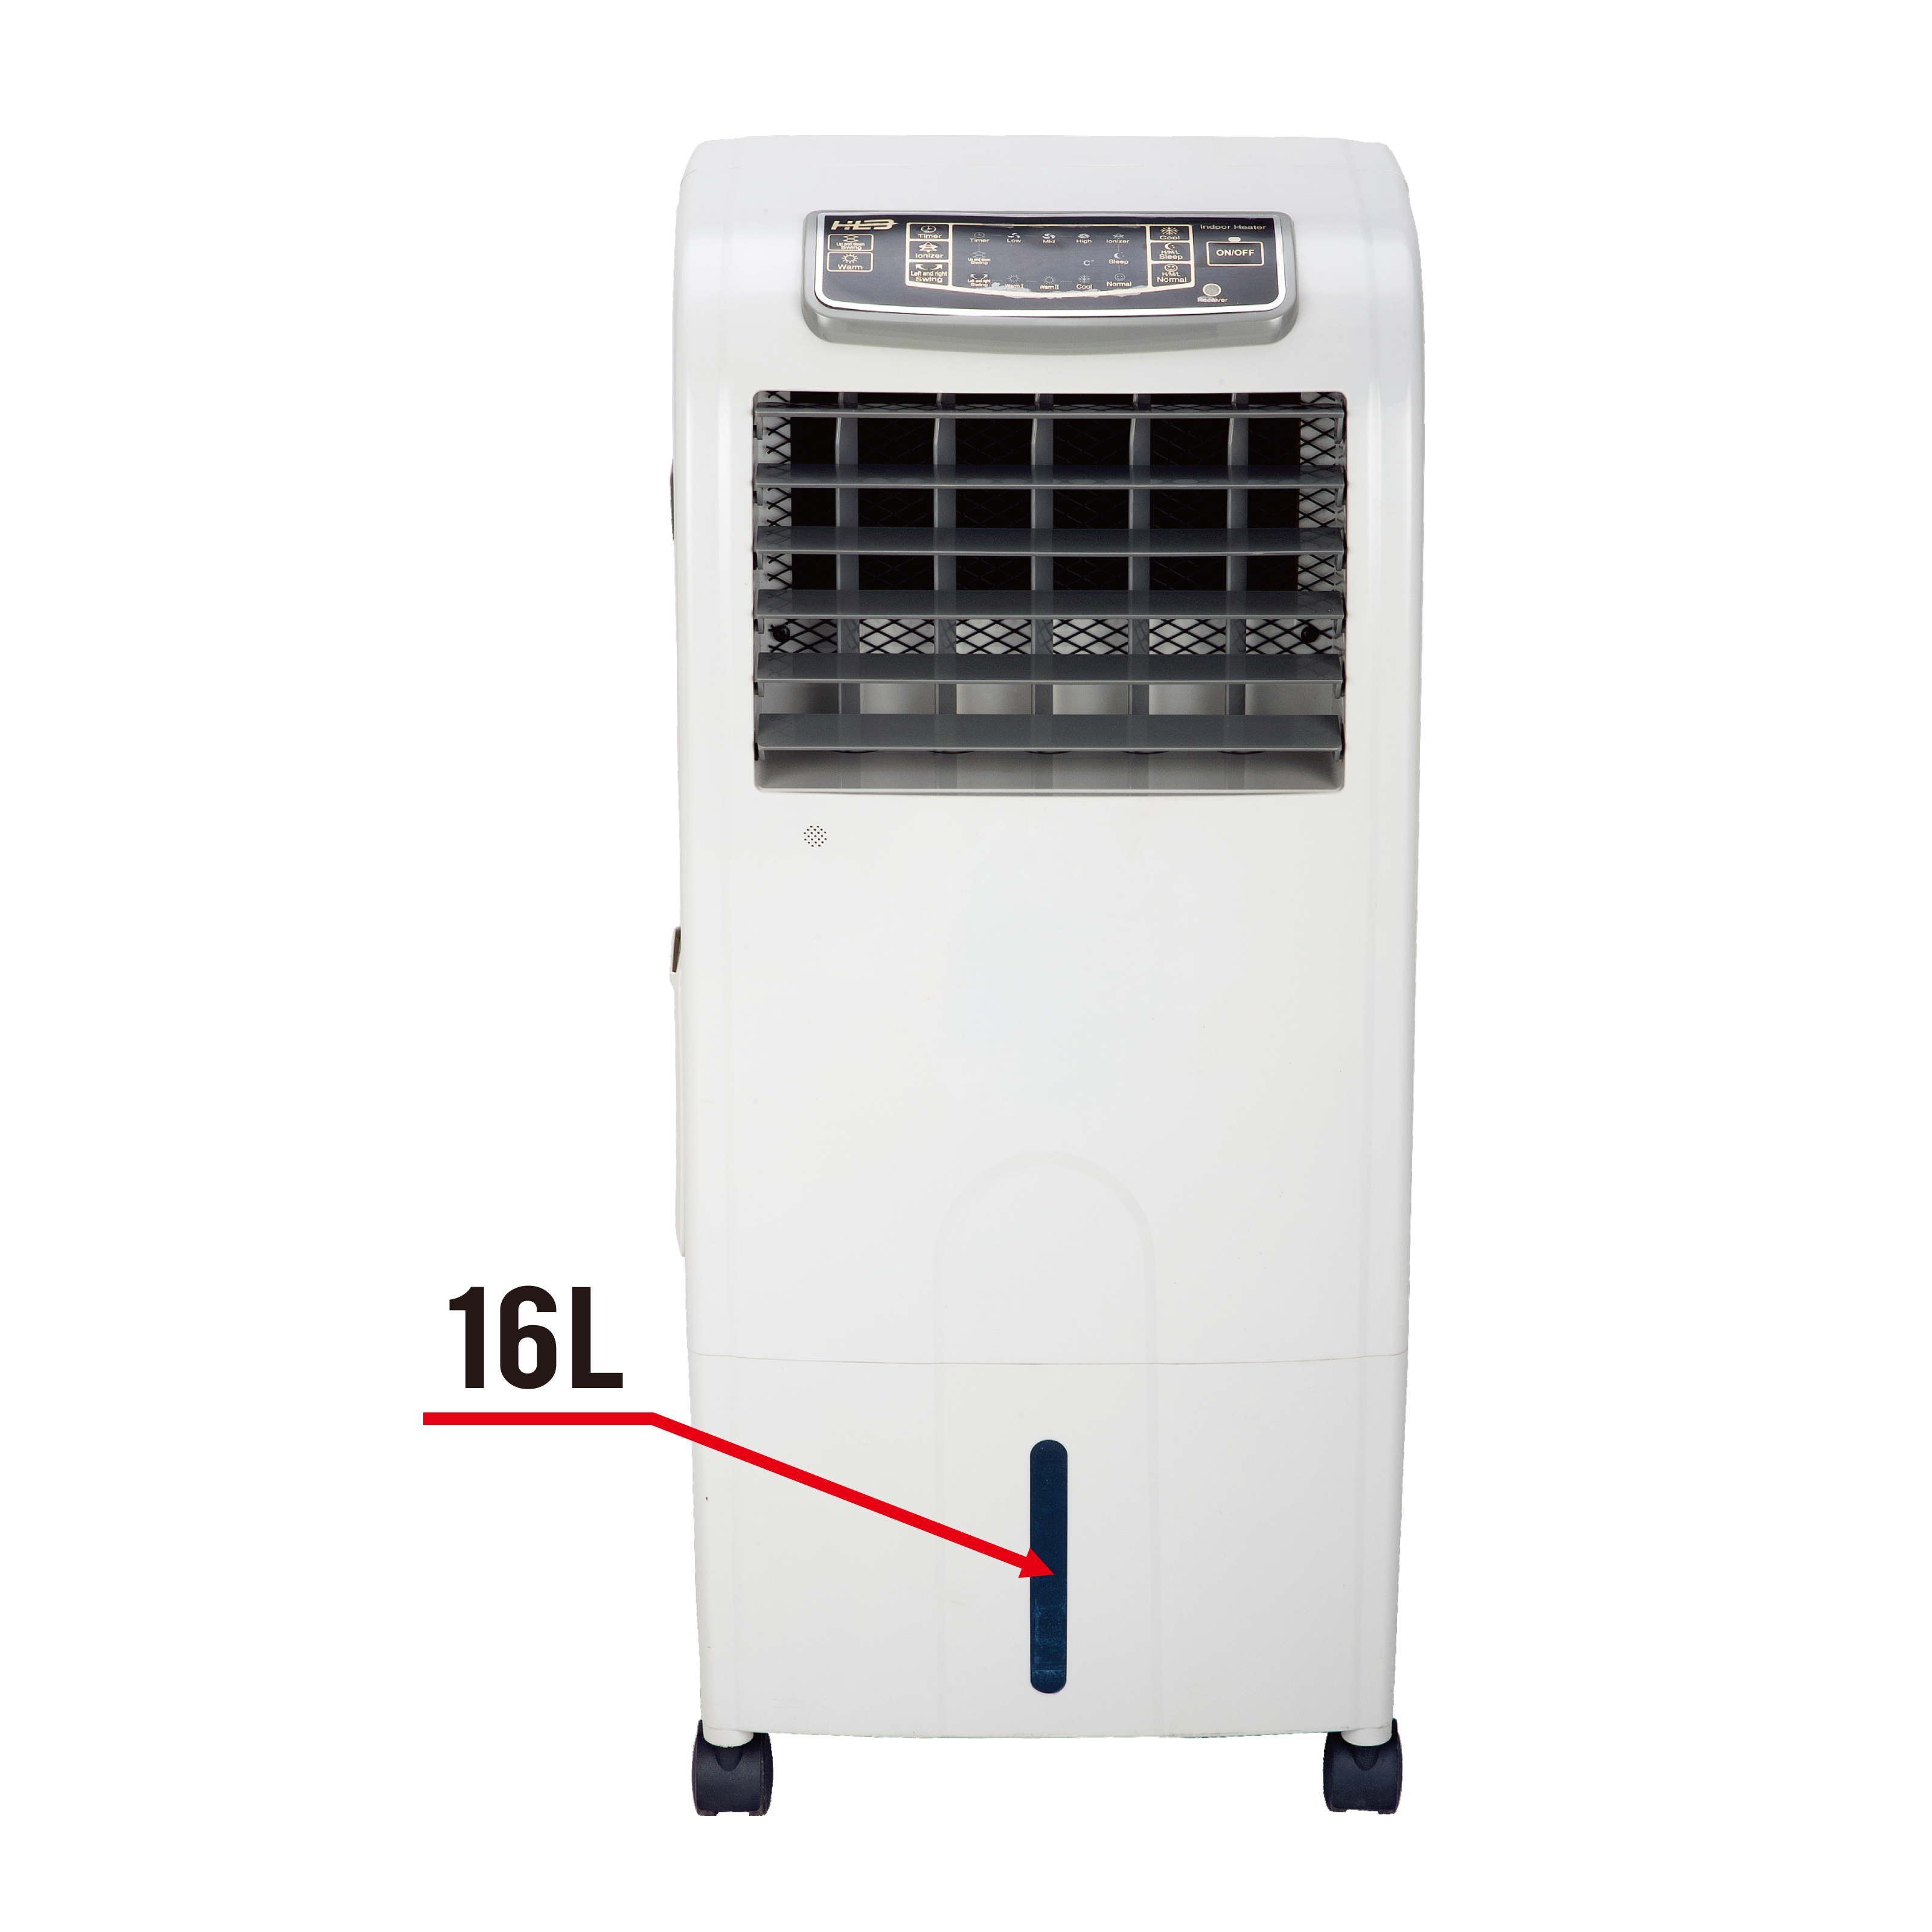 The Water Cooling & PTC Heating Electrical Air Cooler Heater 16 升